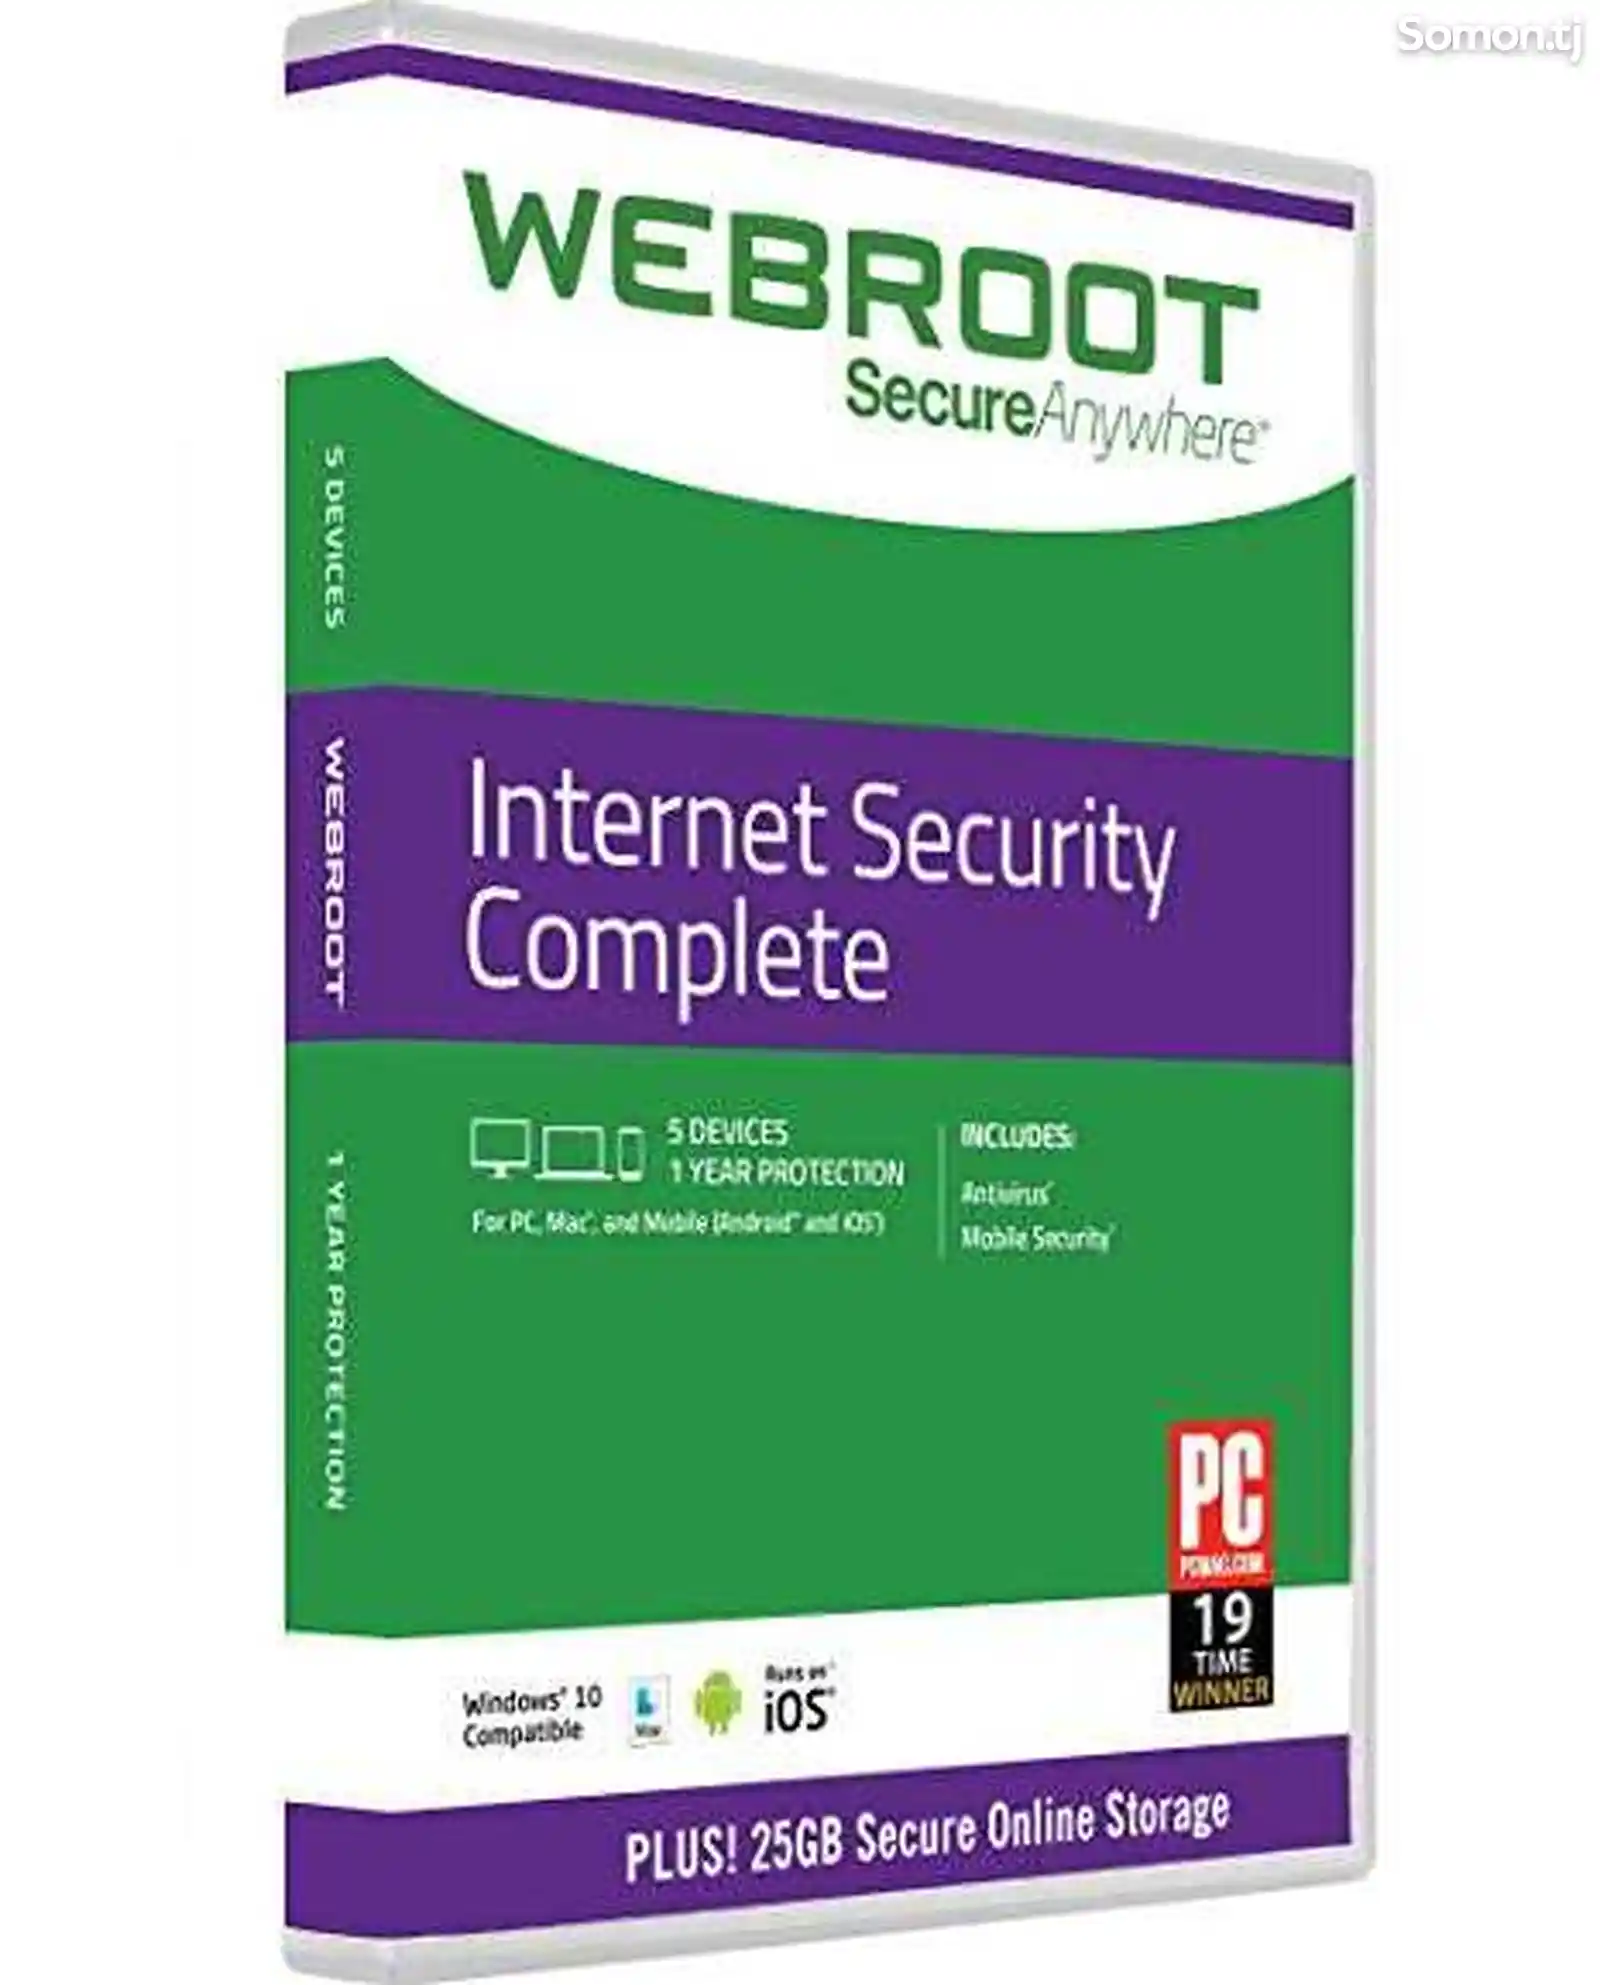 Webroot SecureAnywhere Complete - иҷозатнома барои 3 роёна, 1 сол